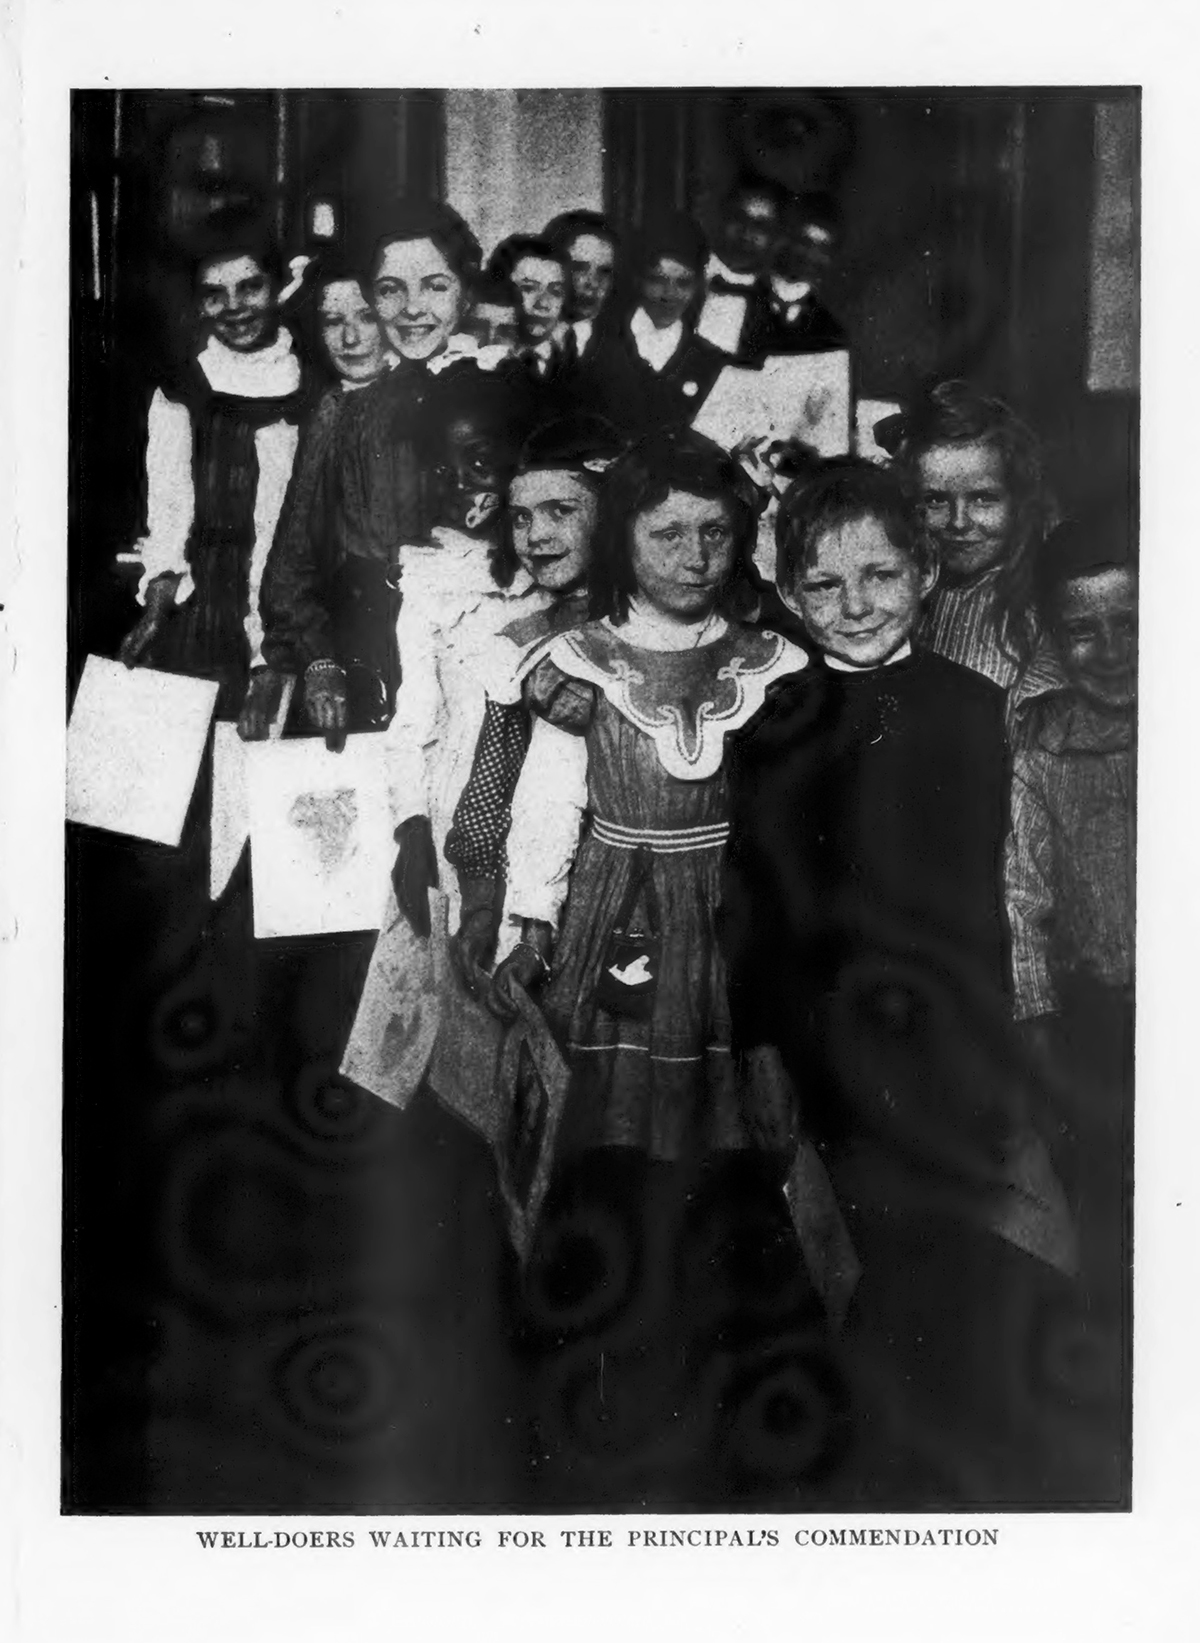 Schoolchildren of different ages are lined up, holding documents in their hands. Original caption reads &quot;Well-Doers Waiting for the Principal's Commendation&quot;